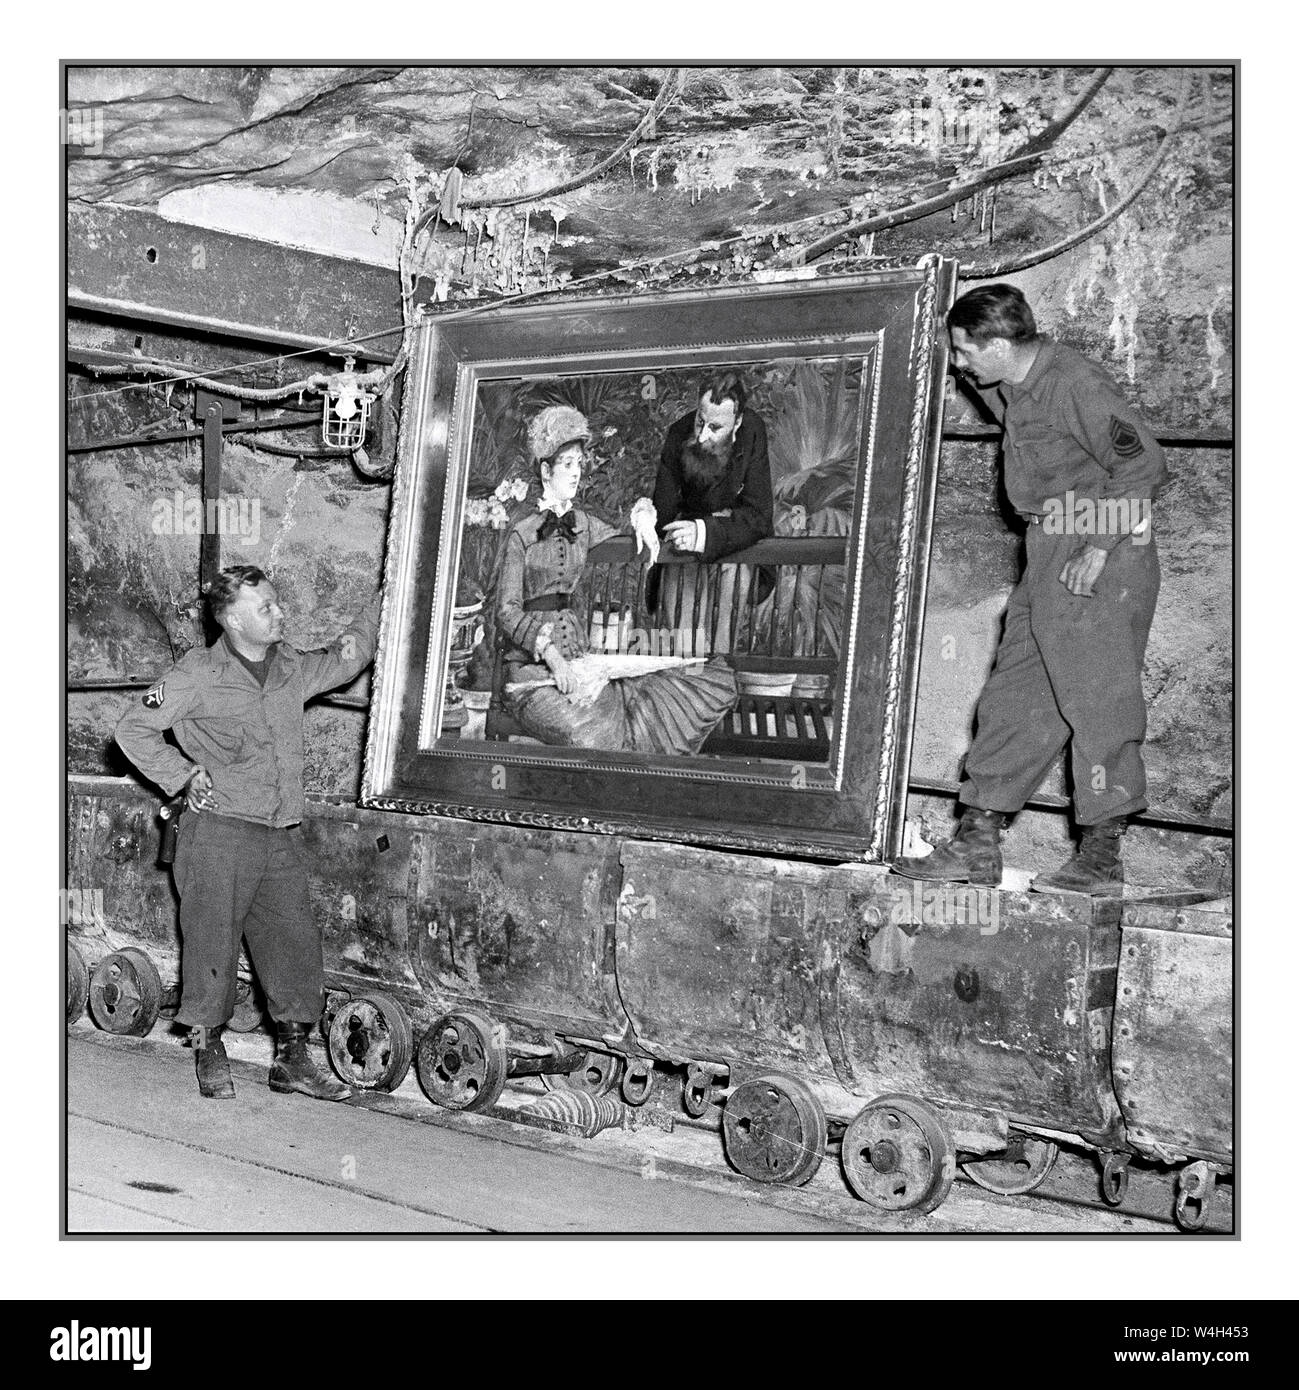 Vintage post-WW2 Nazi Loot found at Merkers, Germany U.S. Soldiers examine a famous painting, 'In the Winter Garden' by MANET, Edouard' by the French Impressionist Edouard Manet, in the collection of Reichbank wealth, SS loot, and paintings removed by the Nazis from Berlin to a salt mine vault. The 90th Div, U.S. Third Army, discovered the gold and other treasure. 04/15/45 Photographer: Cpl. Ornitz Stock Photo